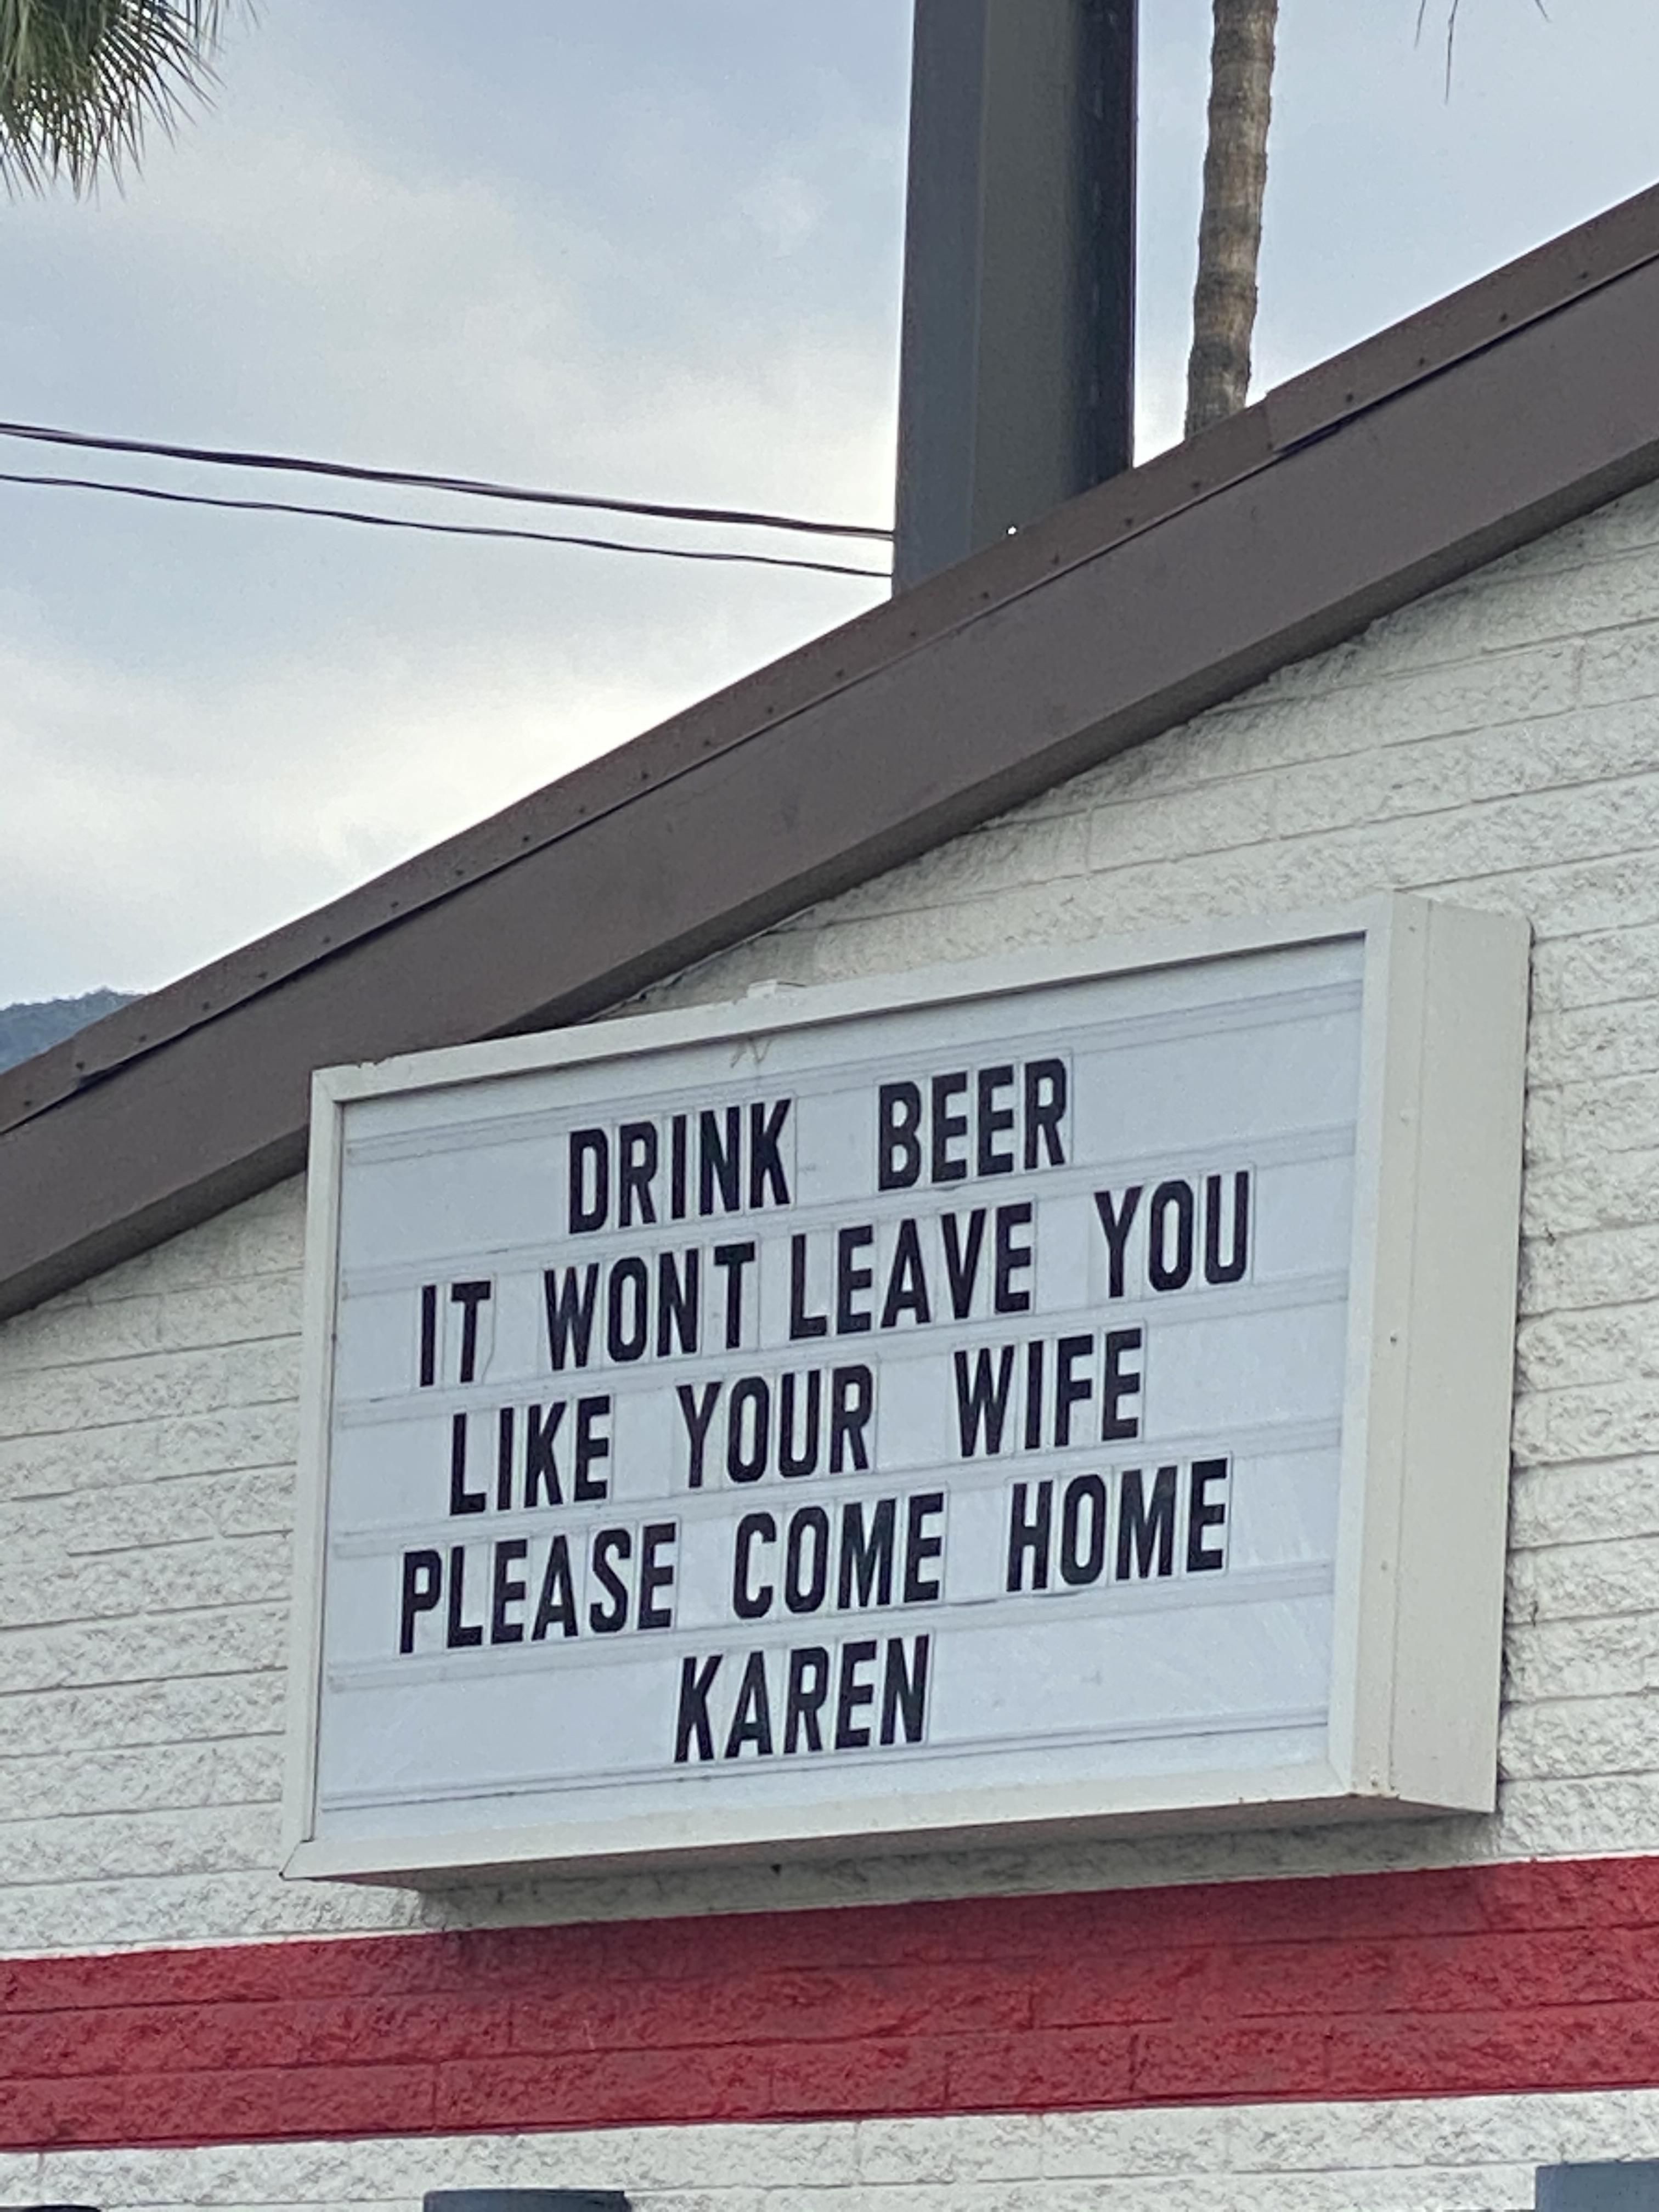 Went to a local bar and saw their sign -